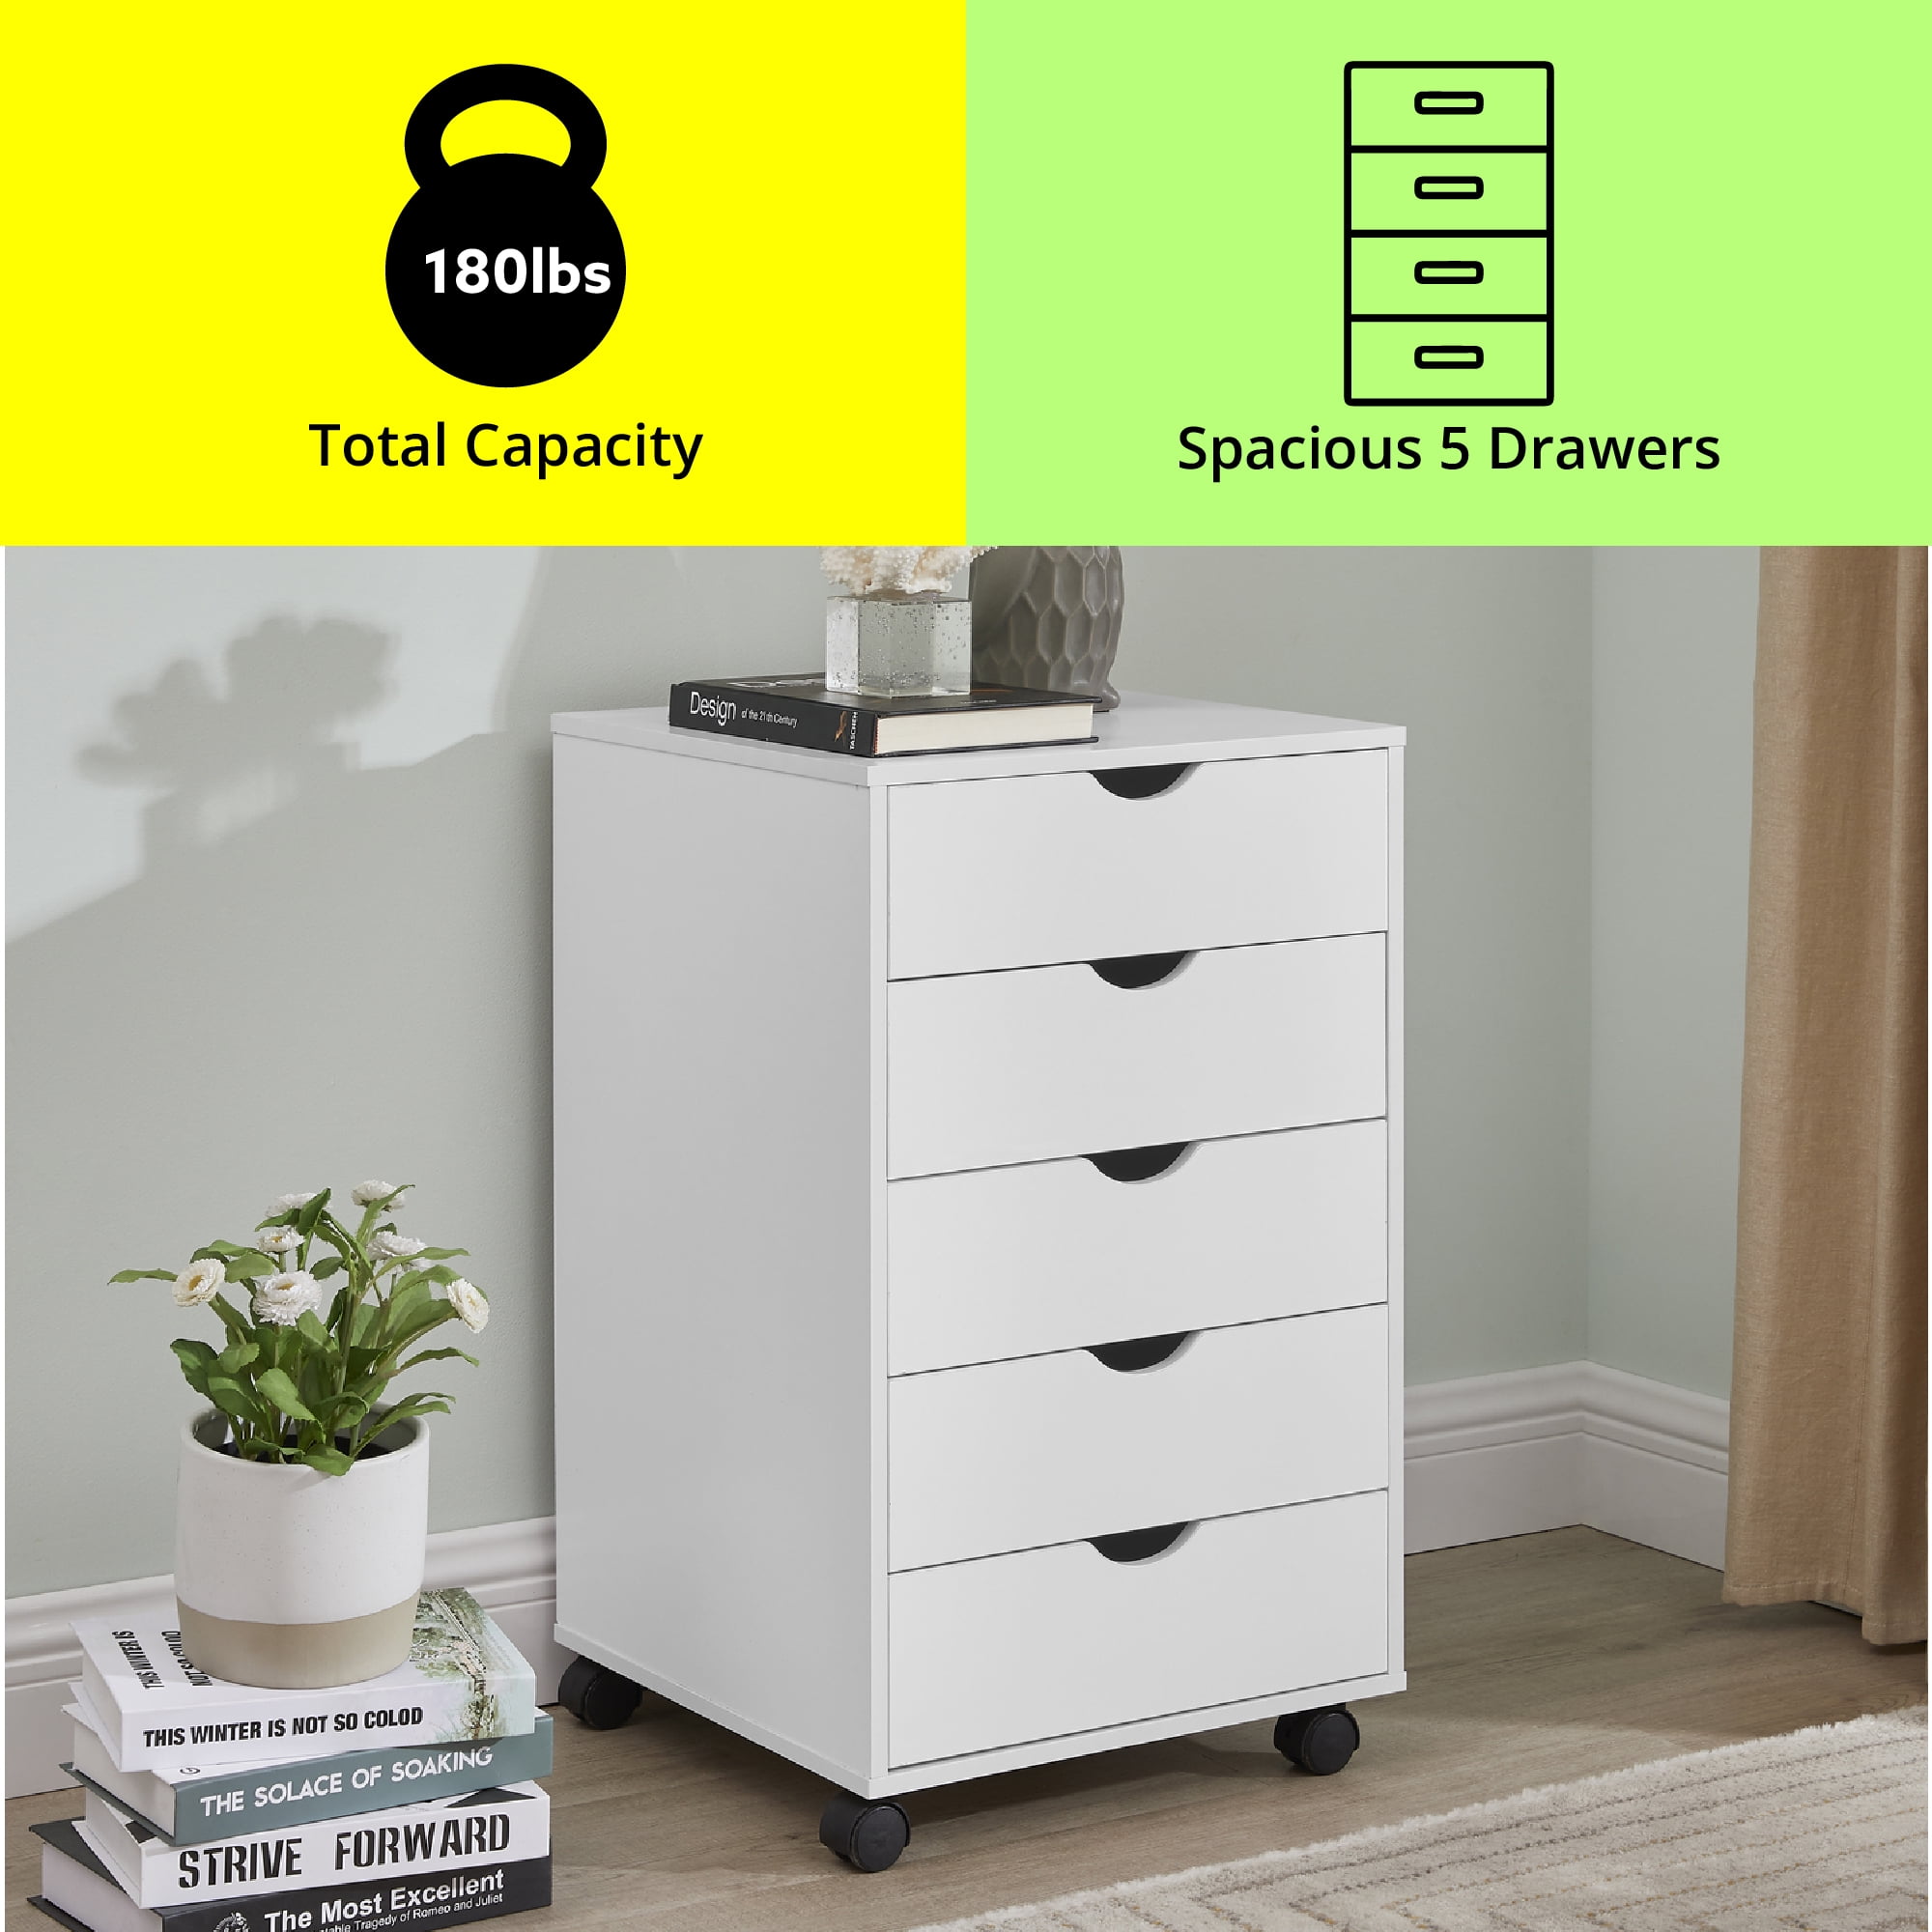 Details about   White Finish Wooden Storage Cabinet Pantry Cupboard Laundry Office Organizer 